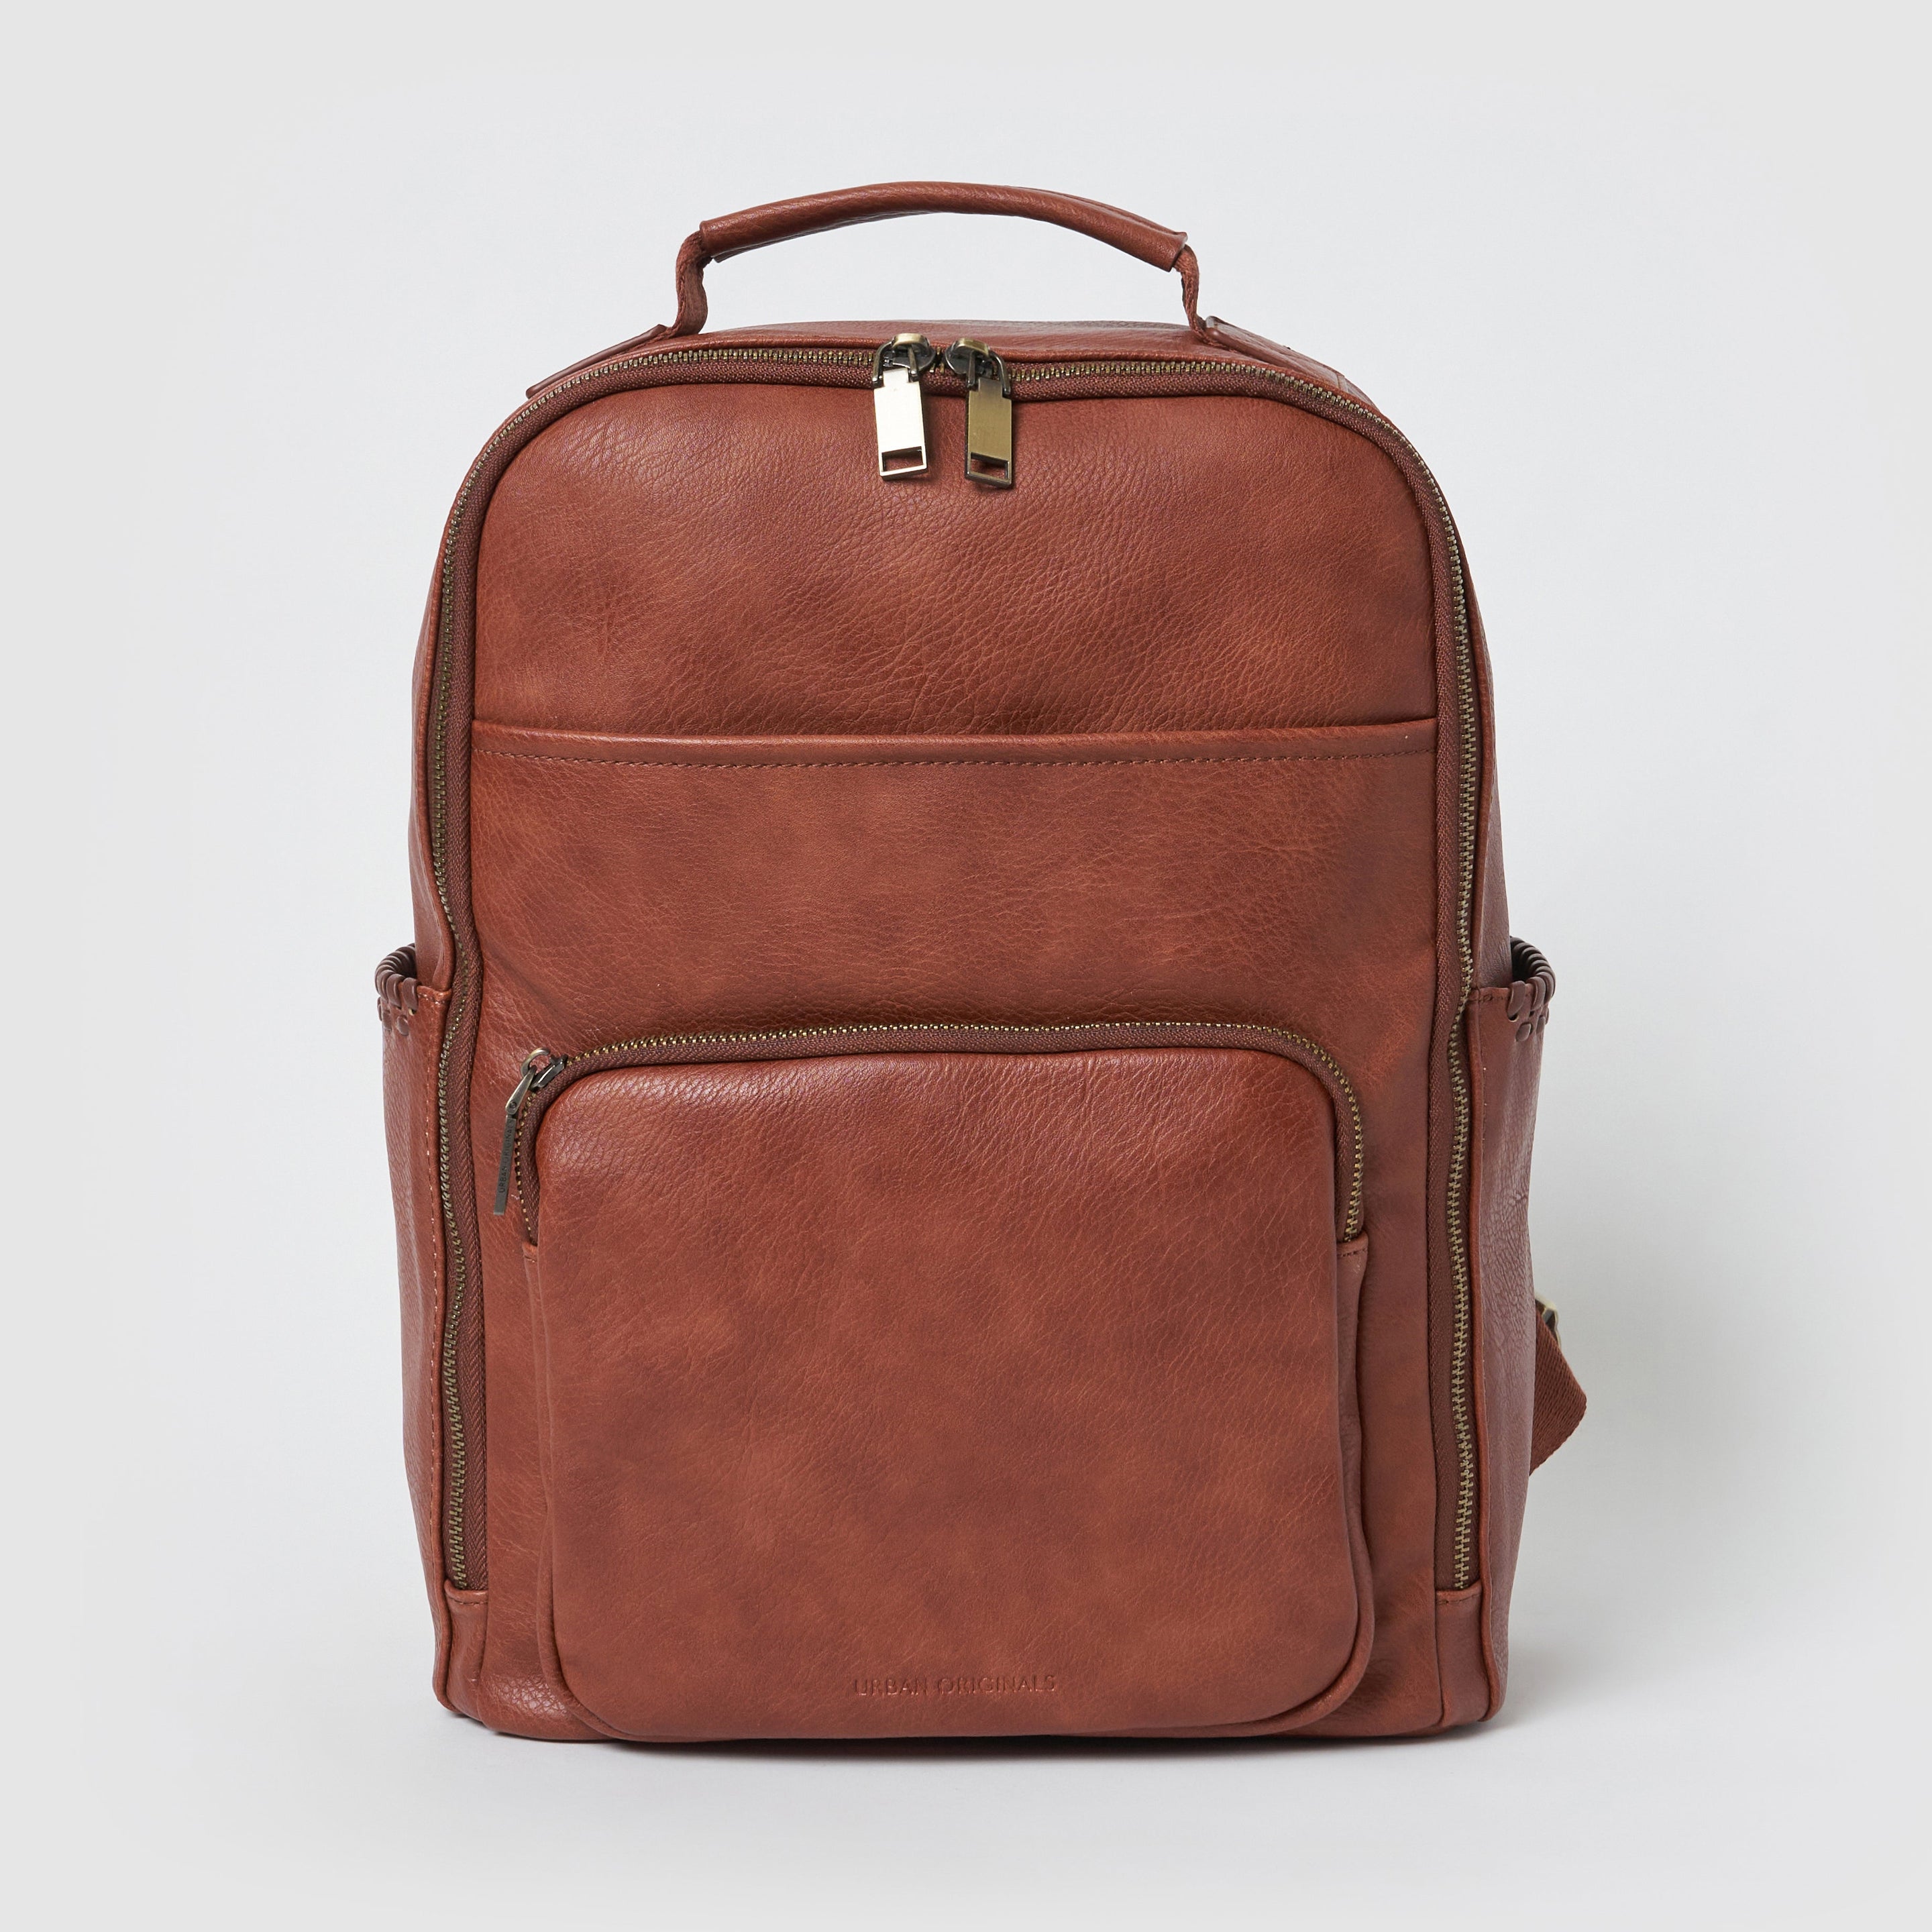 Load image into Gallery viewer, Astra Backpack - Chocolate
